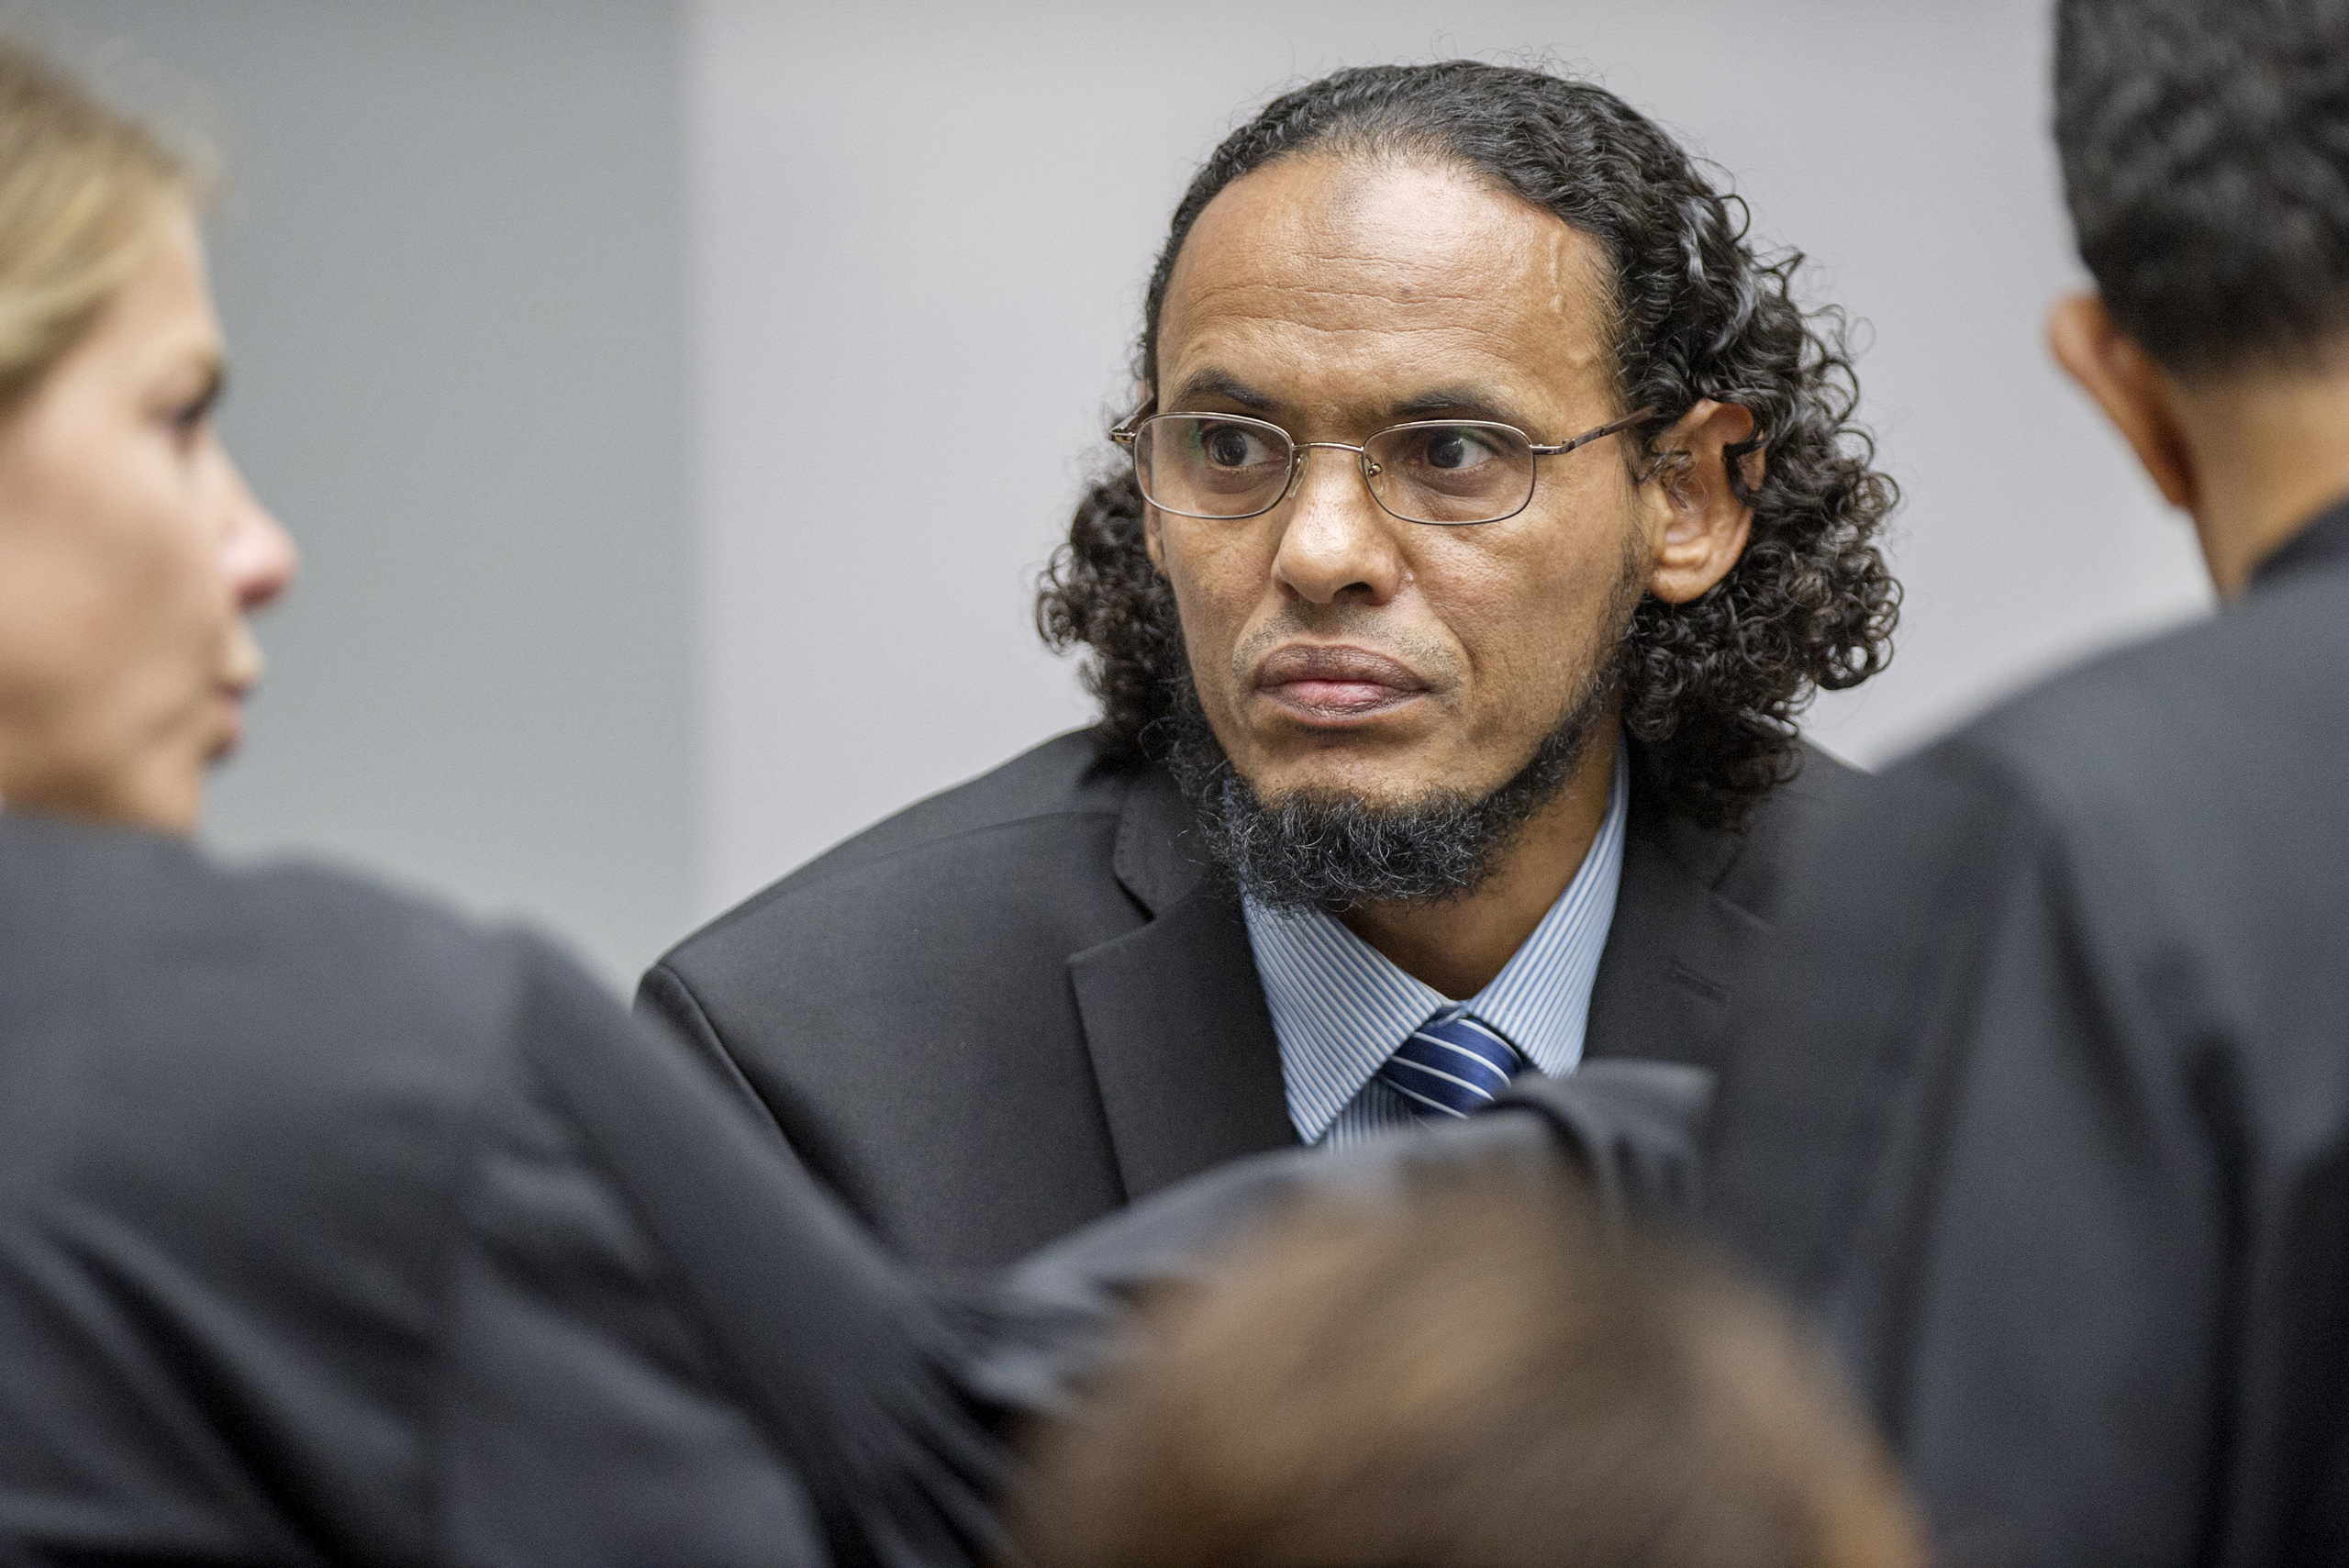 Ahmad Al Faqi Al Mahdi, center, appears at the International Criminal Court in The Hague, Netherlands, on Aug. 22, 2016, at the start of his trial on charges of involvement in the destruction of historic mausoleums in the Malian desert city of Timbuktu. (Patrick Post—AP)